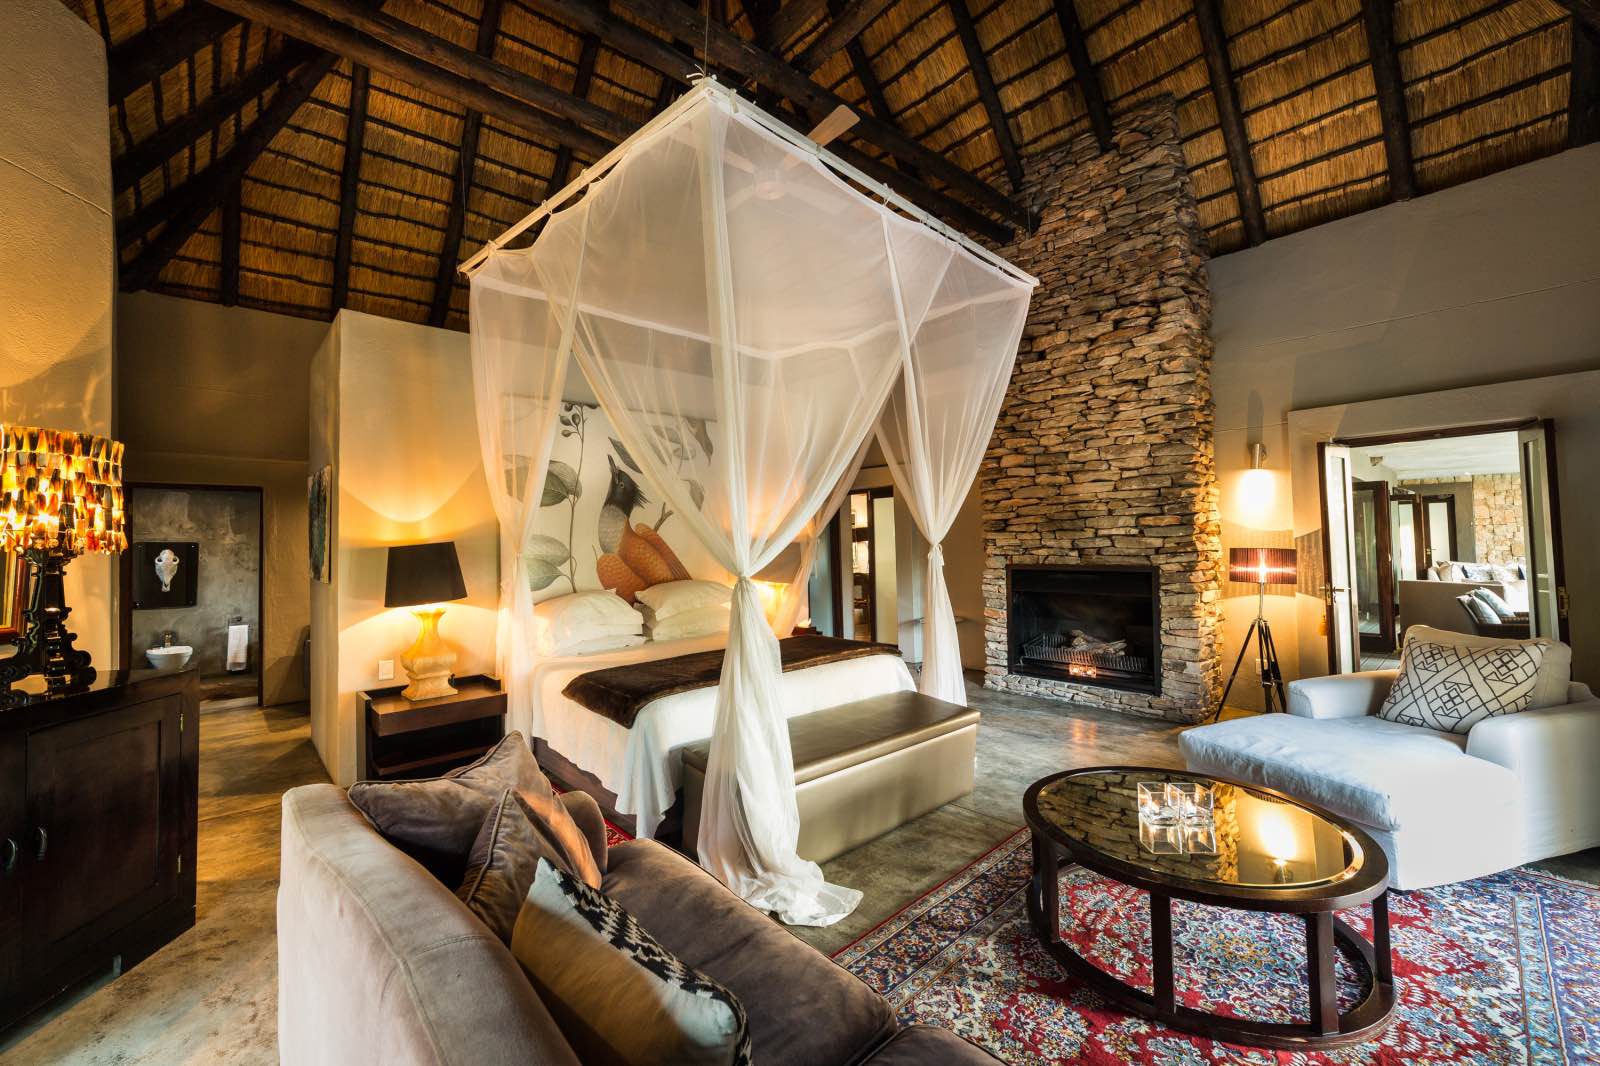 Chitwa House bedroom suite with high thatched ceiling and exquisite detail